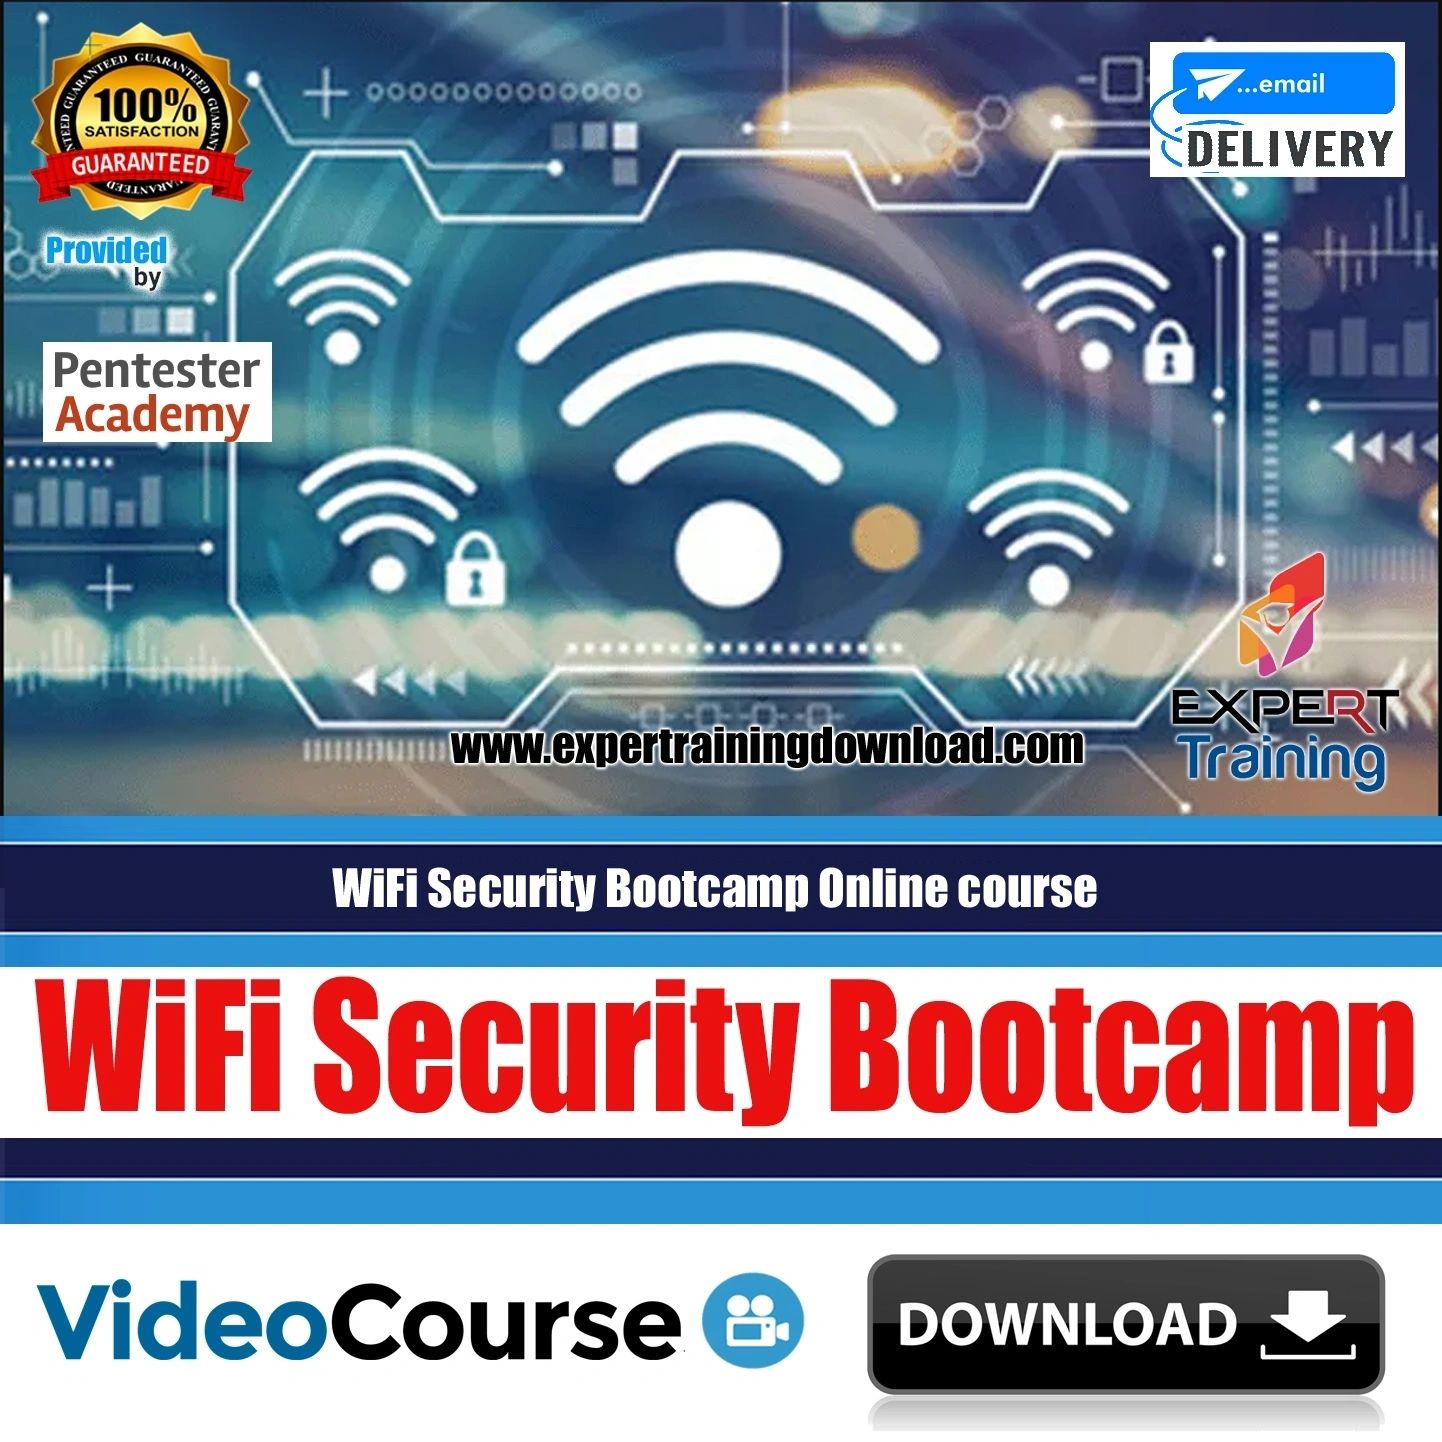 WiFi Security Bootcamp Online Course